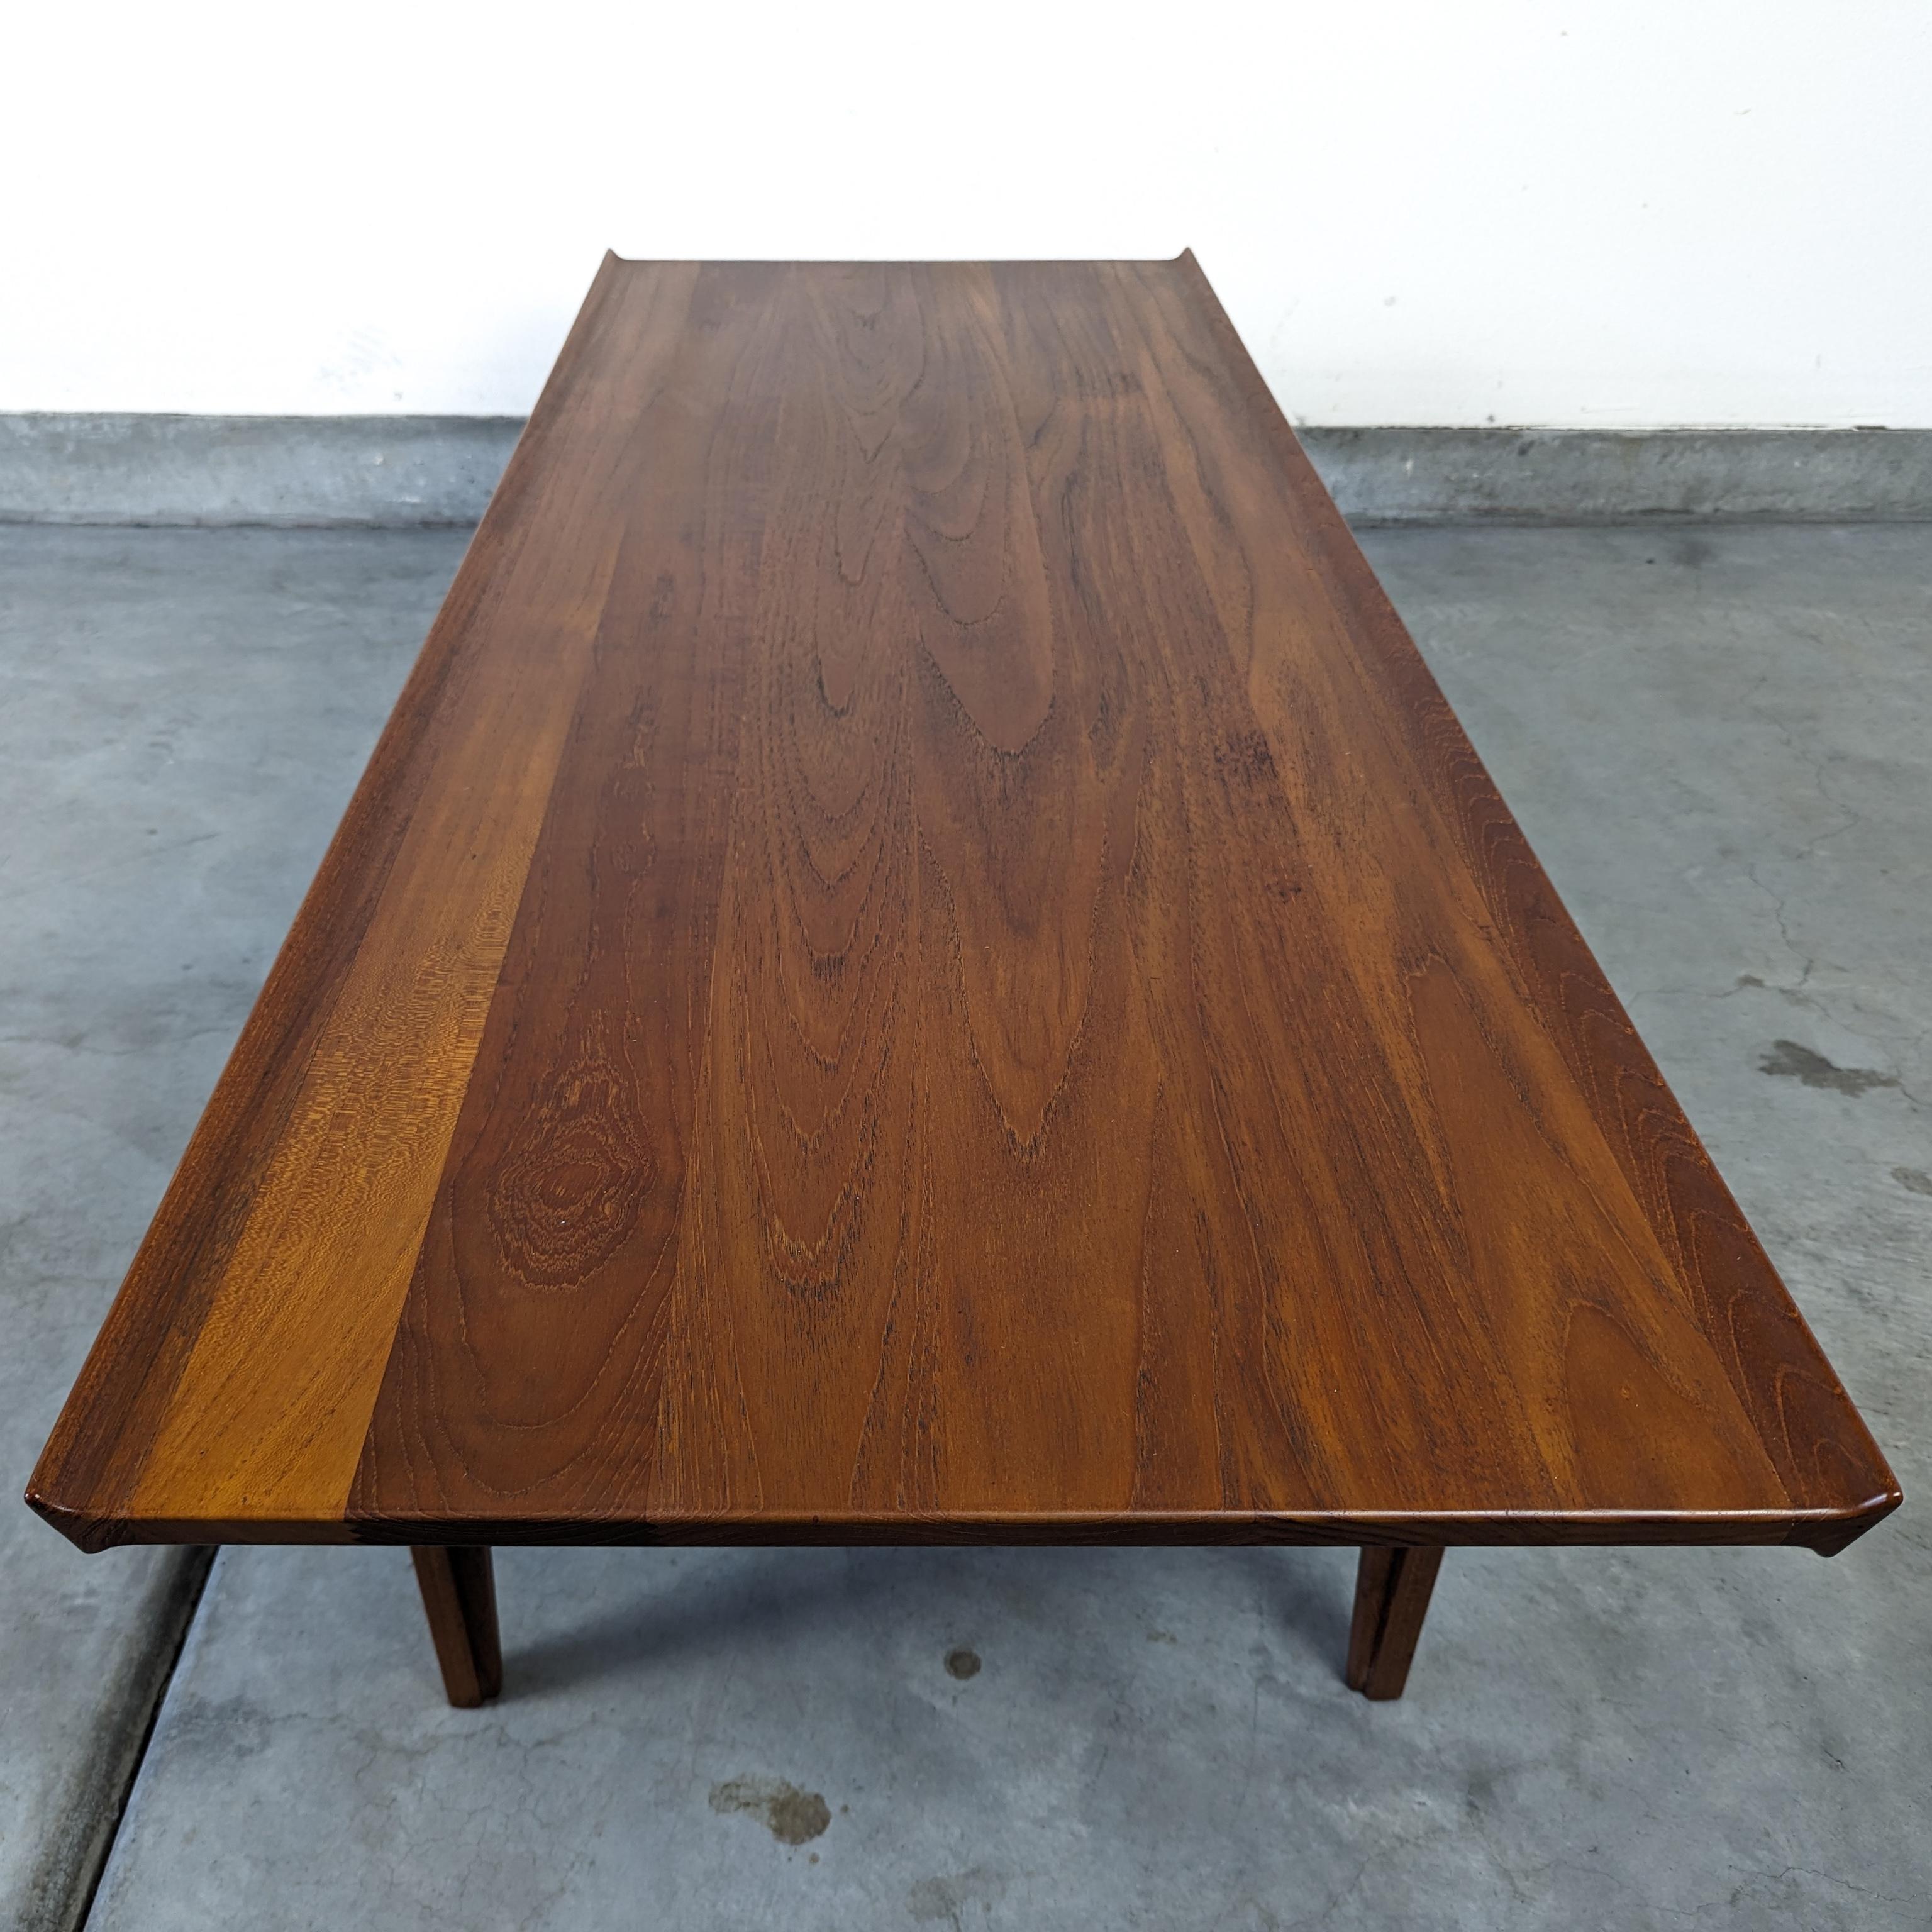 Danish Teak Mid Century Coffee Table by Finn Juhl for France & Søn, 1950s In Good Condition For Sale In Chino Hills, CA